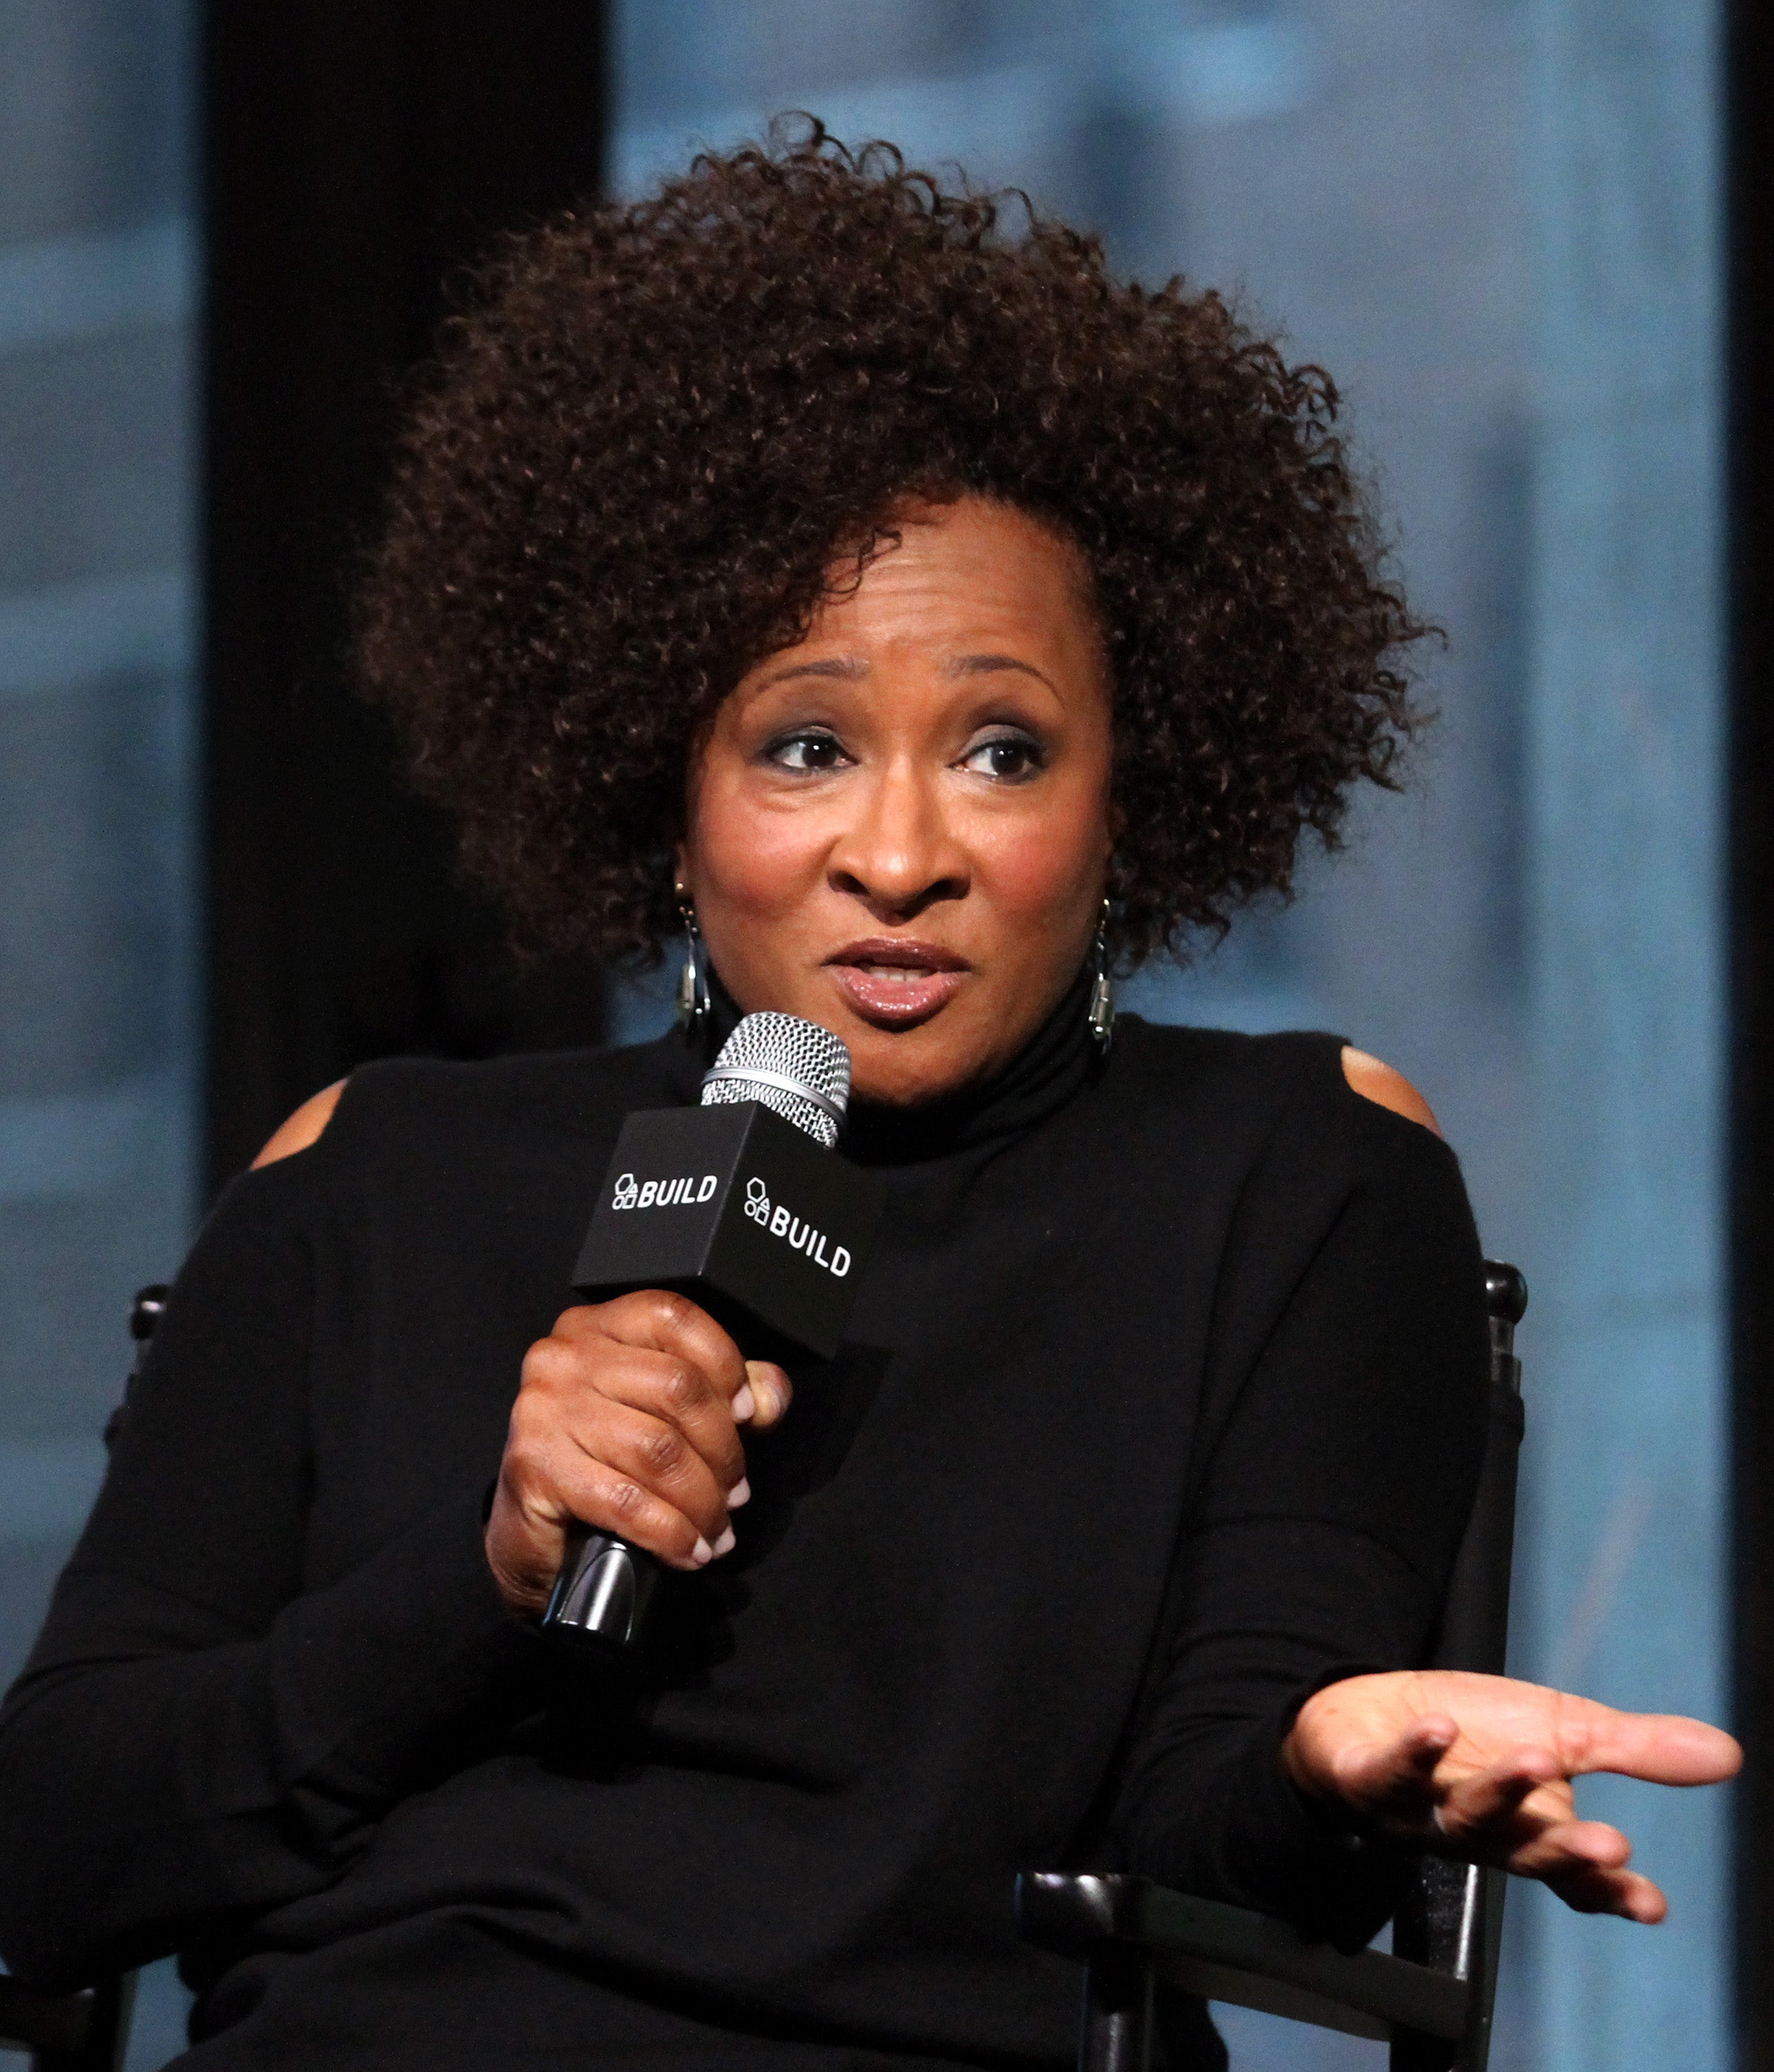 A New Normal? Wanda Sykes Booed By Pro-Trump Audience
